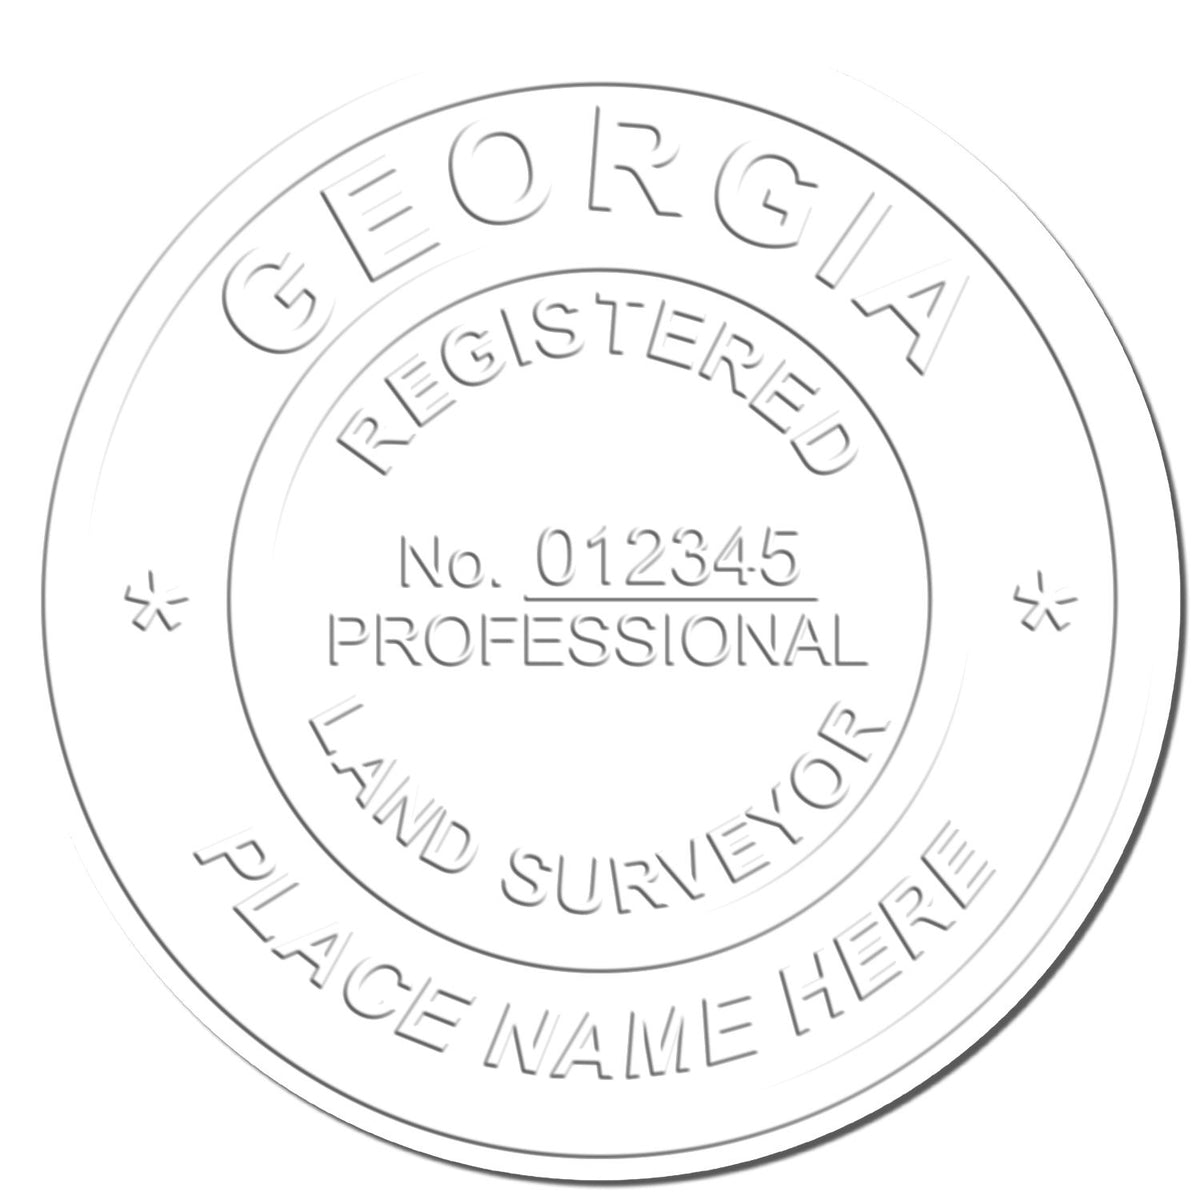 This paper is stamped with a sample imprint of the State of Georgia Soft Land Surveyor Embossing Seal, signifying its quality and reliability.